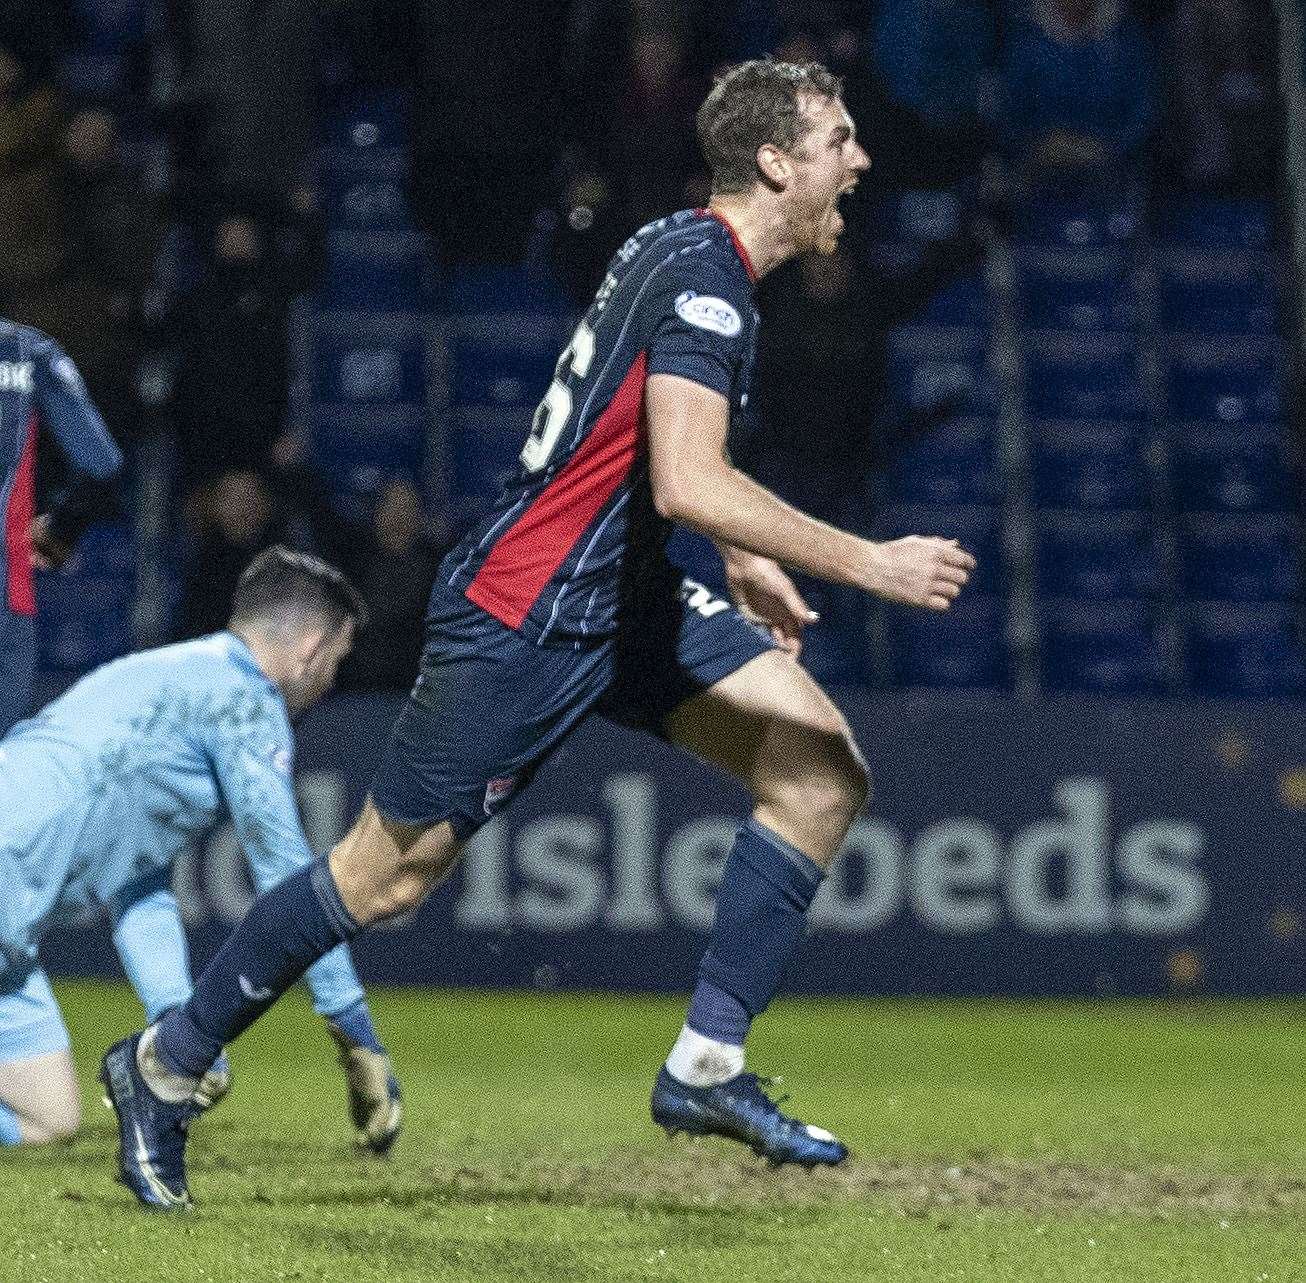 Picture - Ken Macpherson. Ross County(3) v Motherwell(1). 18.01.22. Ross County's Jordan White celebrates after they went 2-1 ahead.